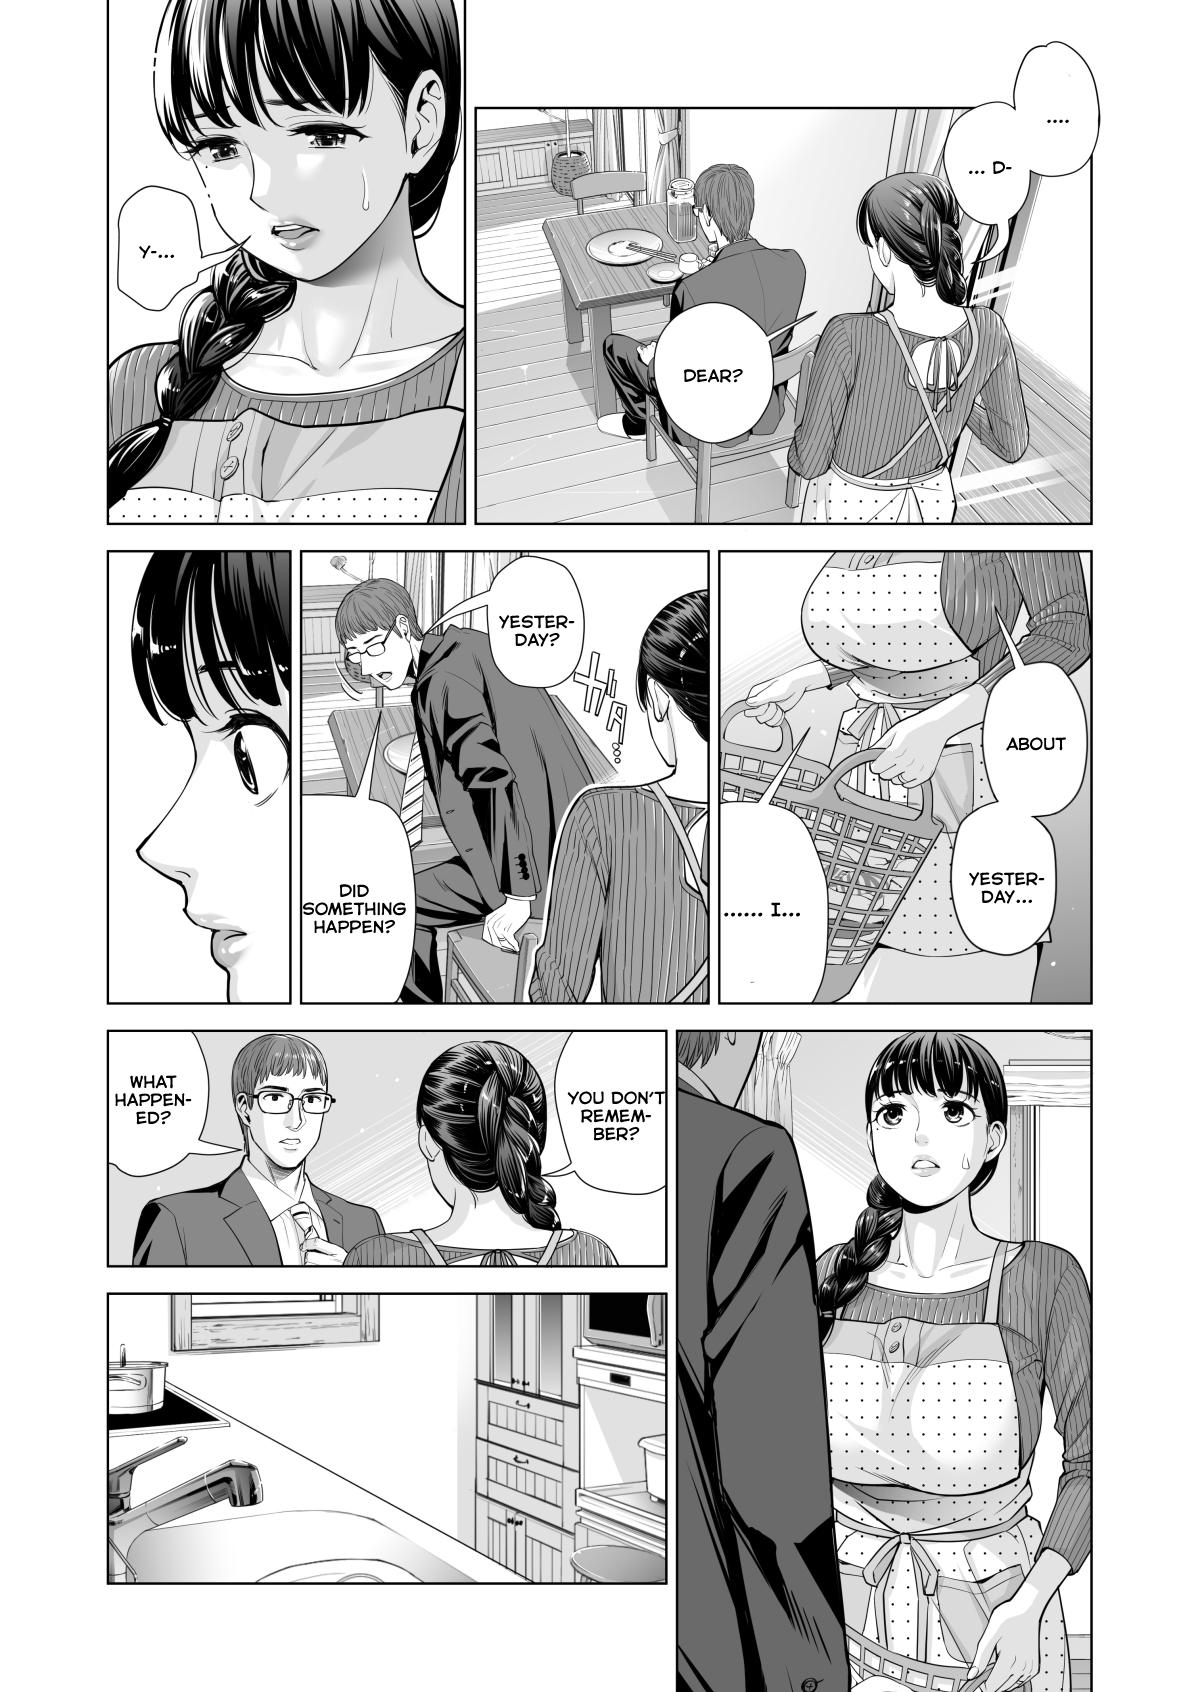 [HGT Lab (Tsusauto)] Tsukiyo no Midare Zake (Kouhen) Moonlit Intoxication ~ A Housewife Stolen by a Coworker Besides her Blackout Drunk Husband ~ Chapter 2 [English] 6